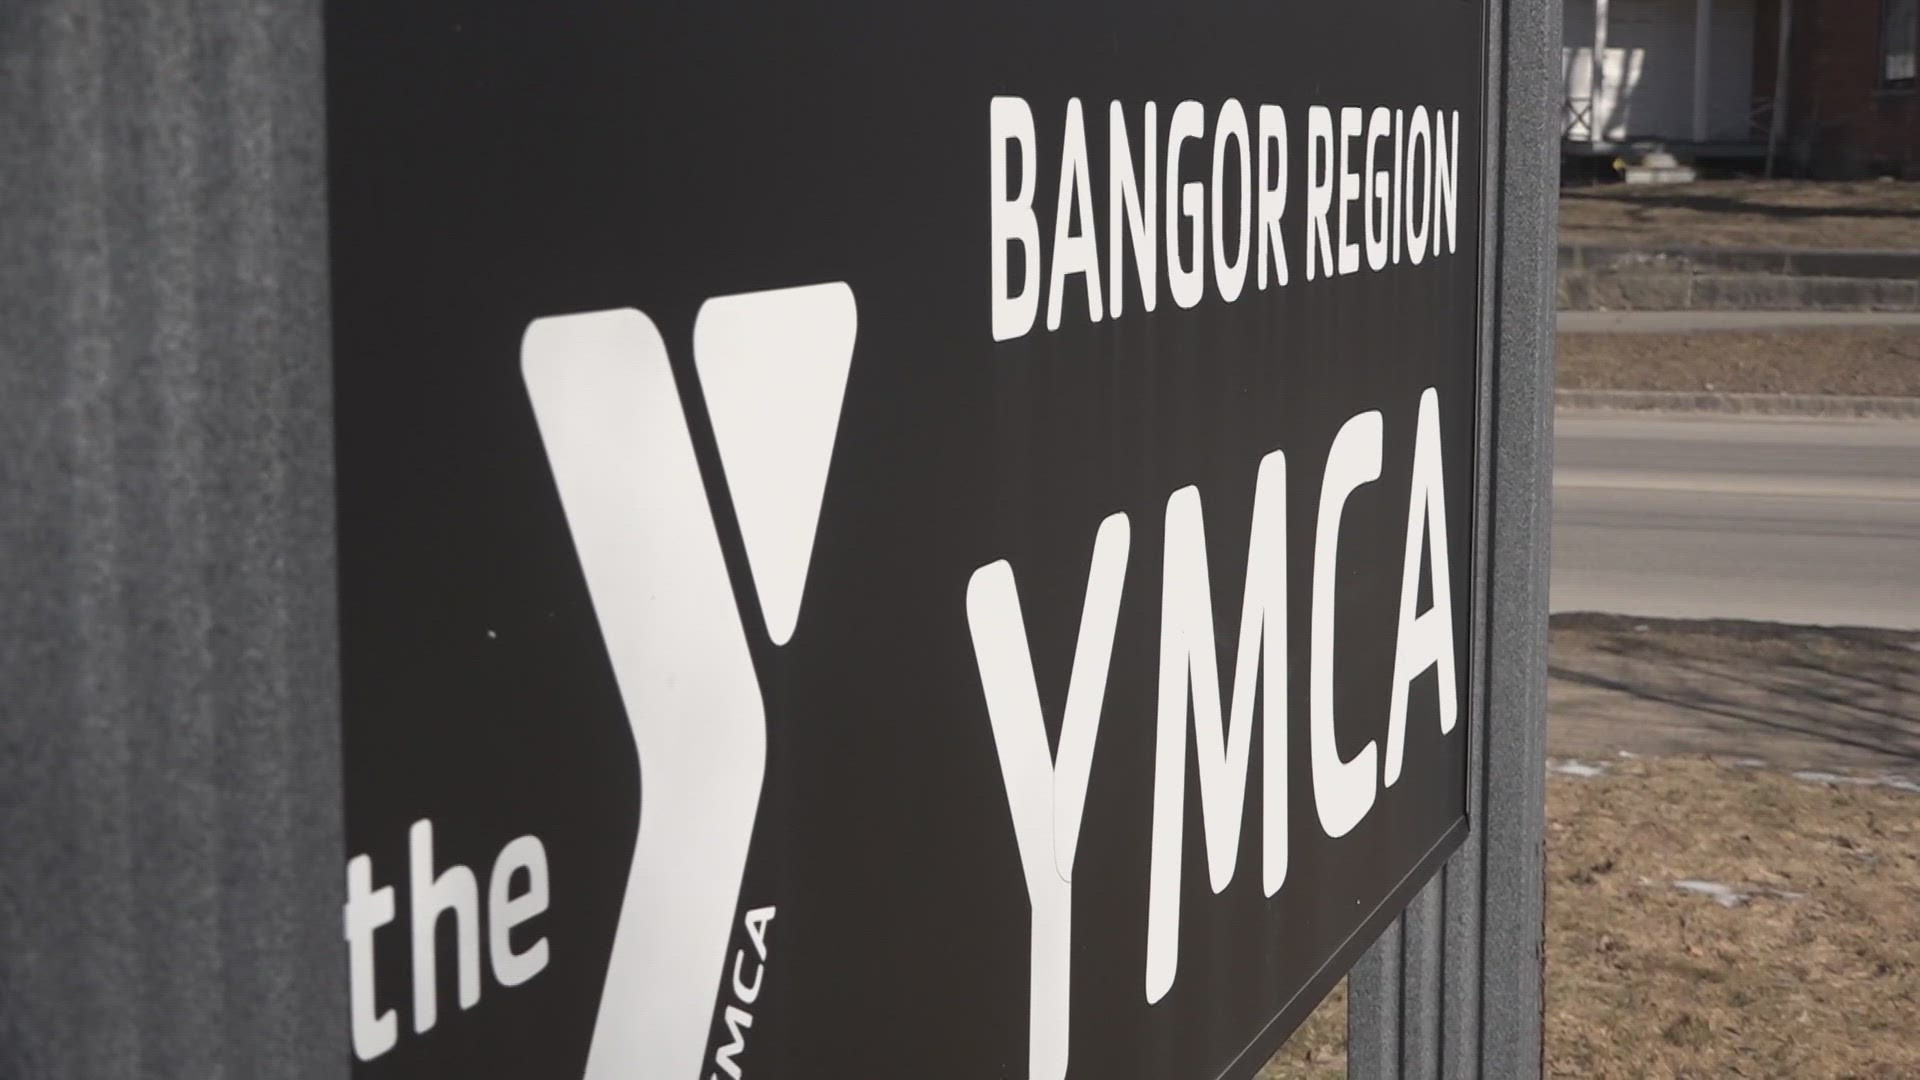 Wayne Quimby said the YMCA did nothing when his basketball coach sexually assaulted him in 1979. The YMCA said it was not to blame for the crime.